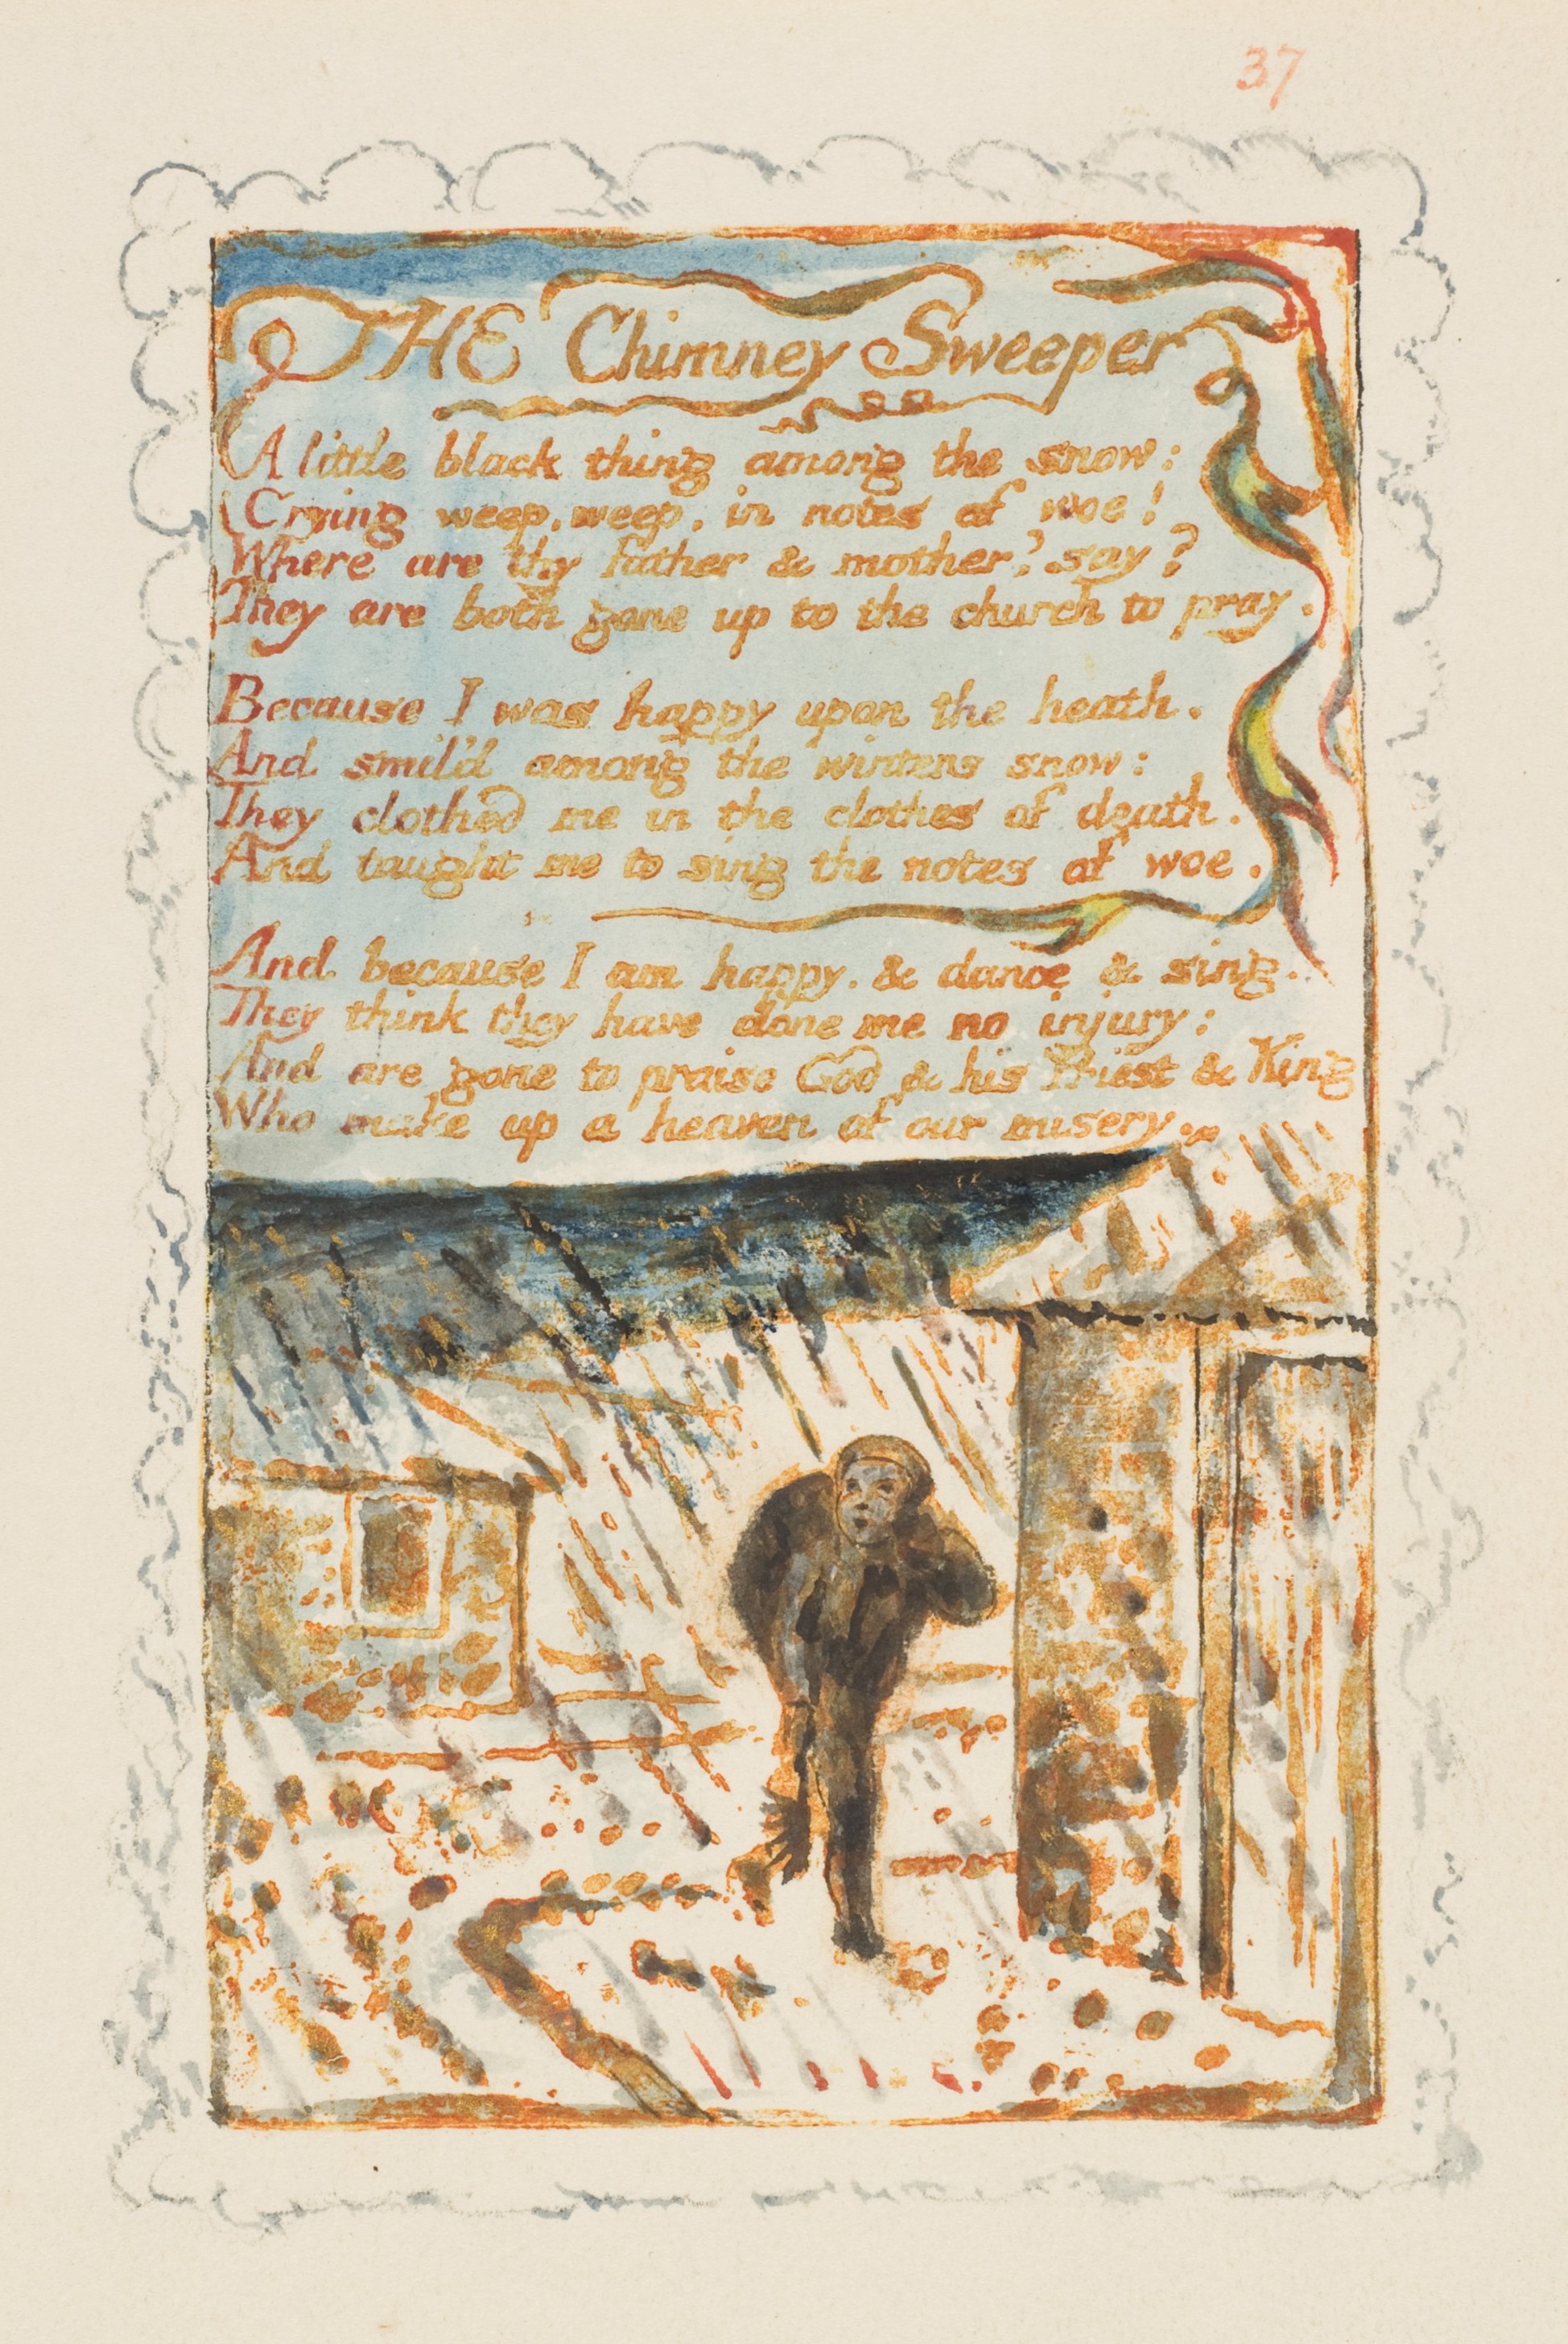 William Blake Songs of Experience The Chimney Sweeper The Metropolitan Museum of Art